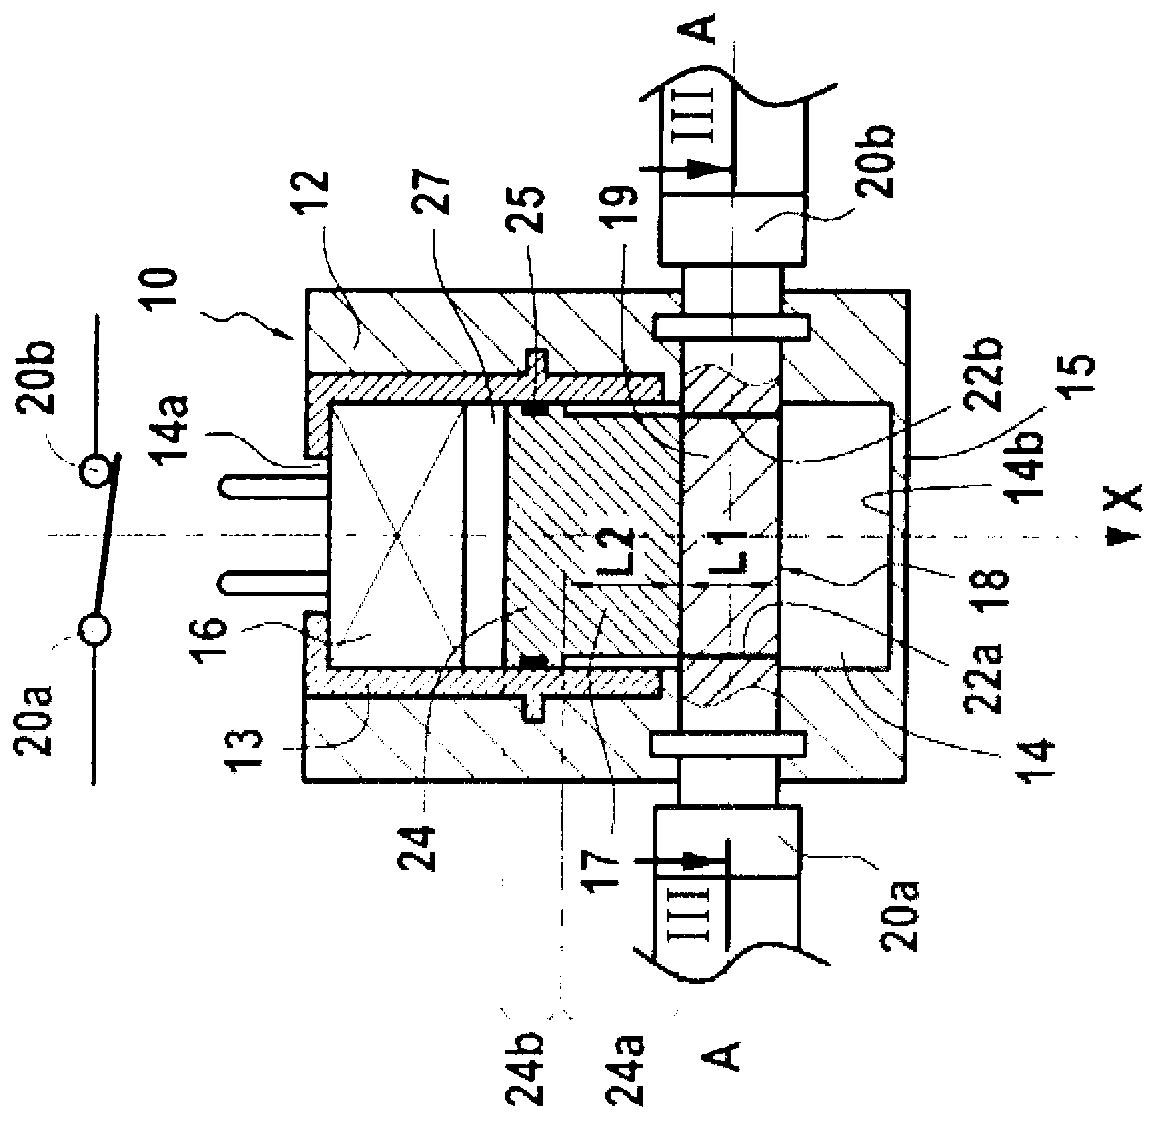 Electric switch having slide forming short-circuit or selector switch